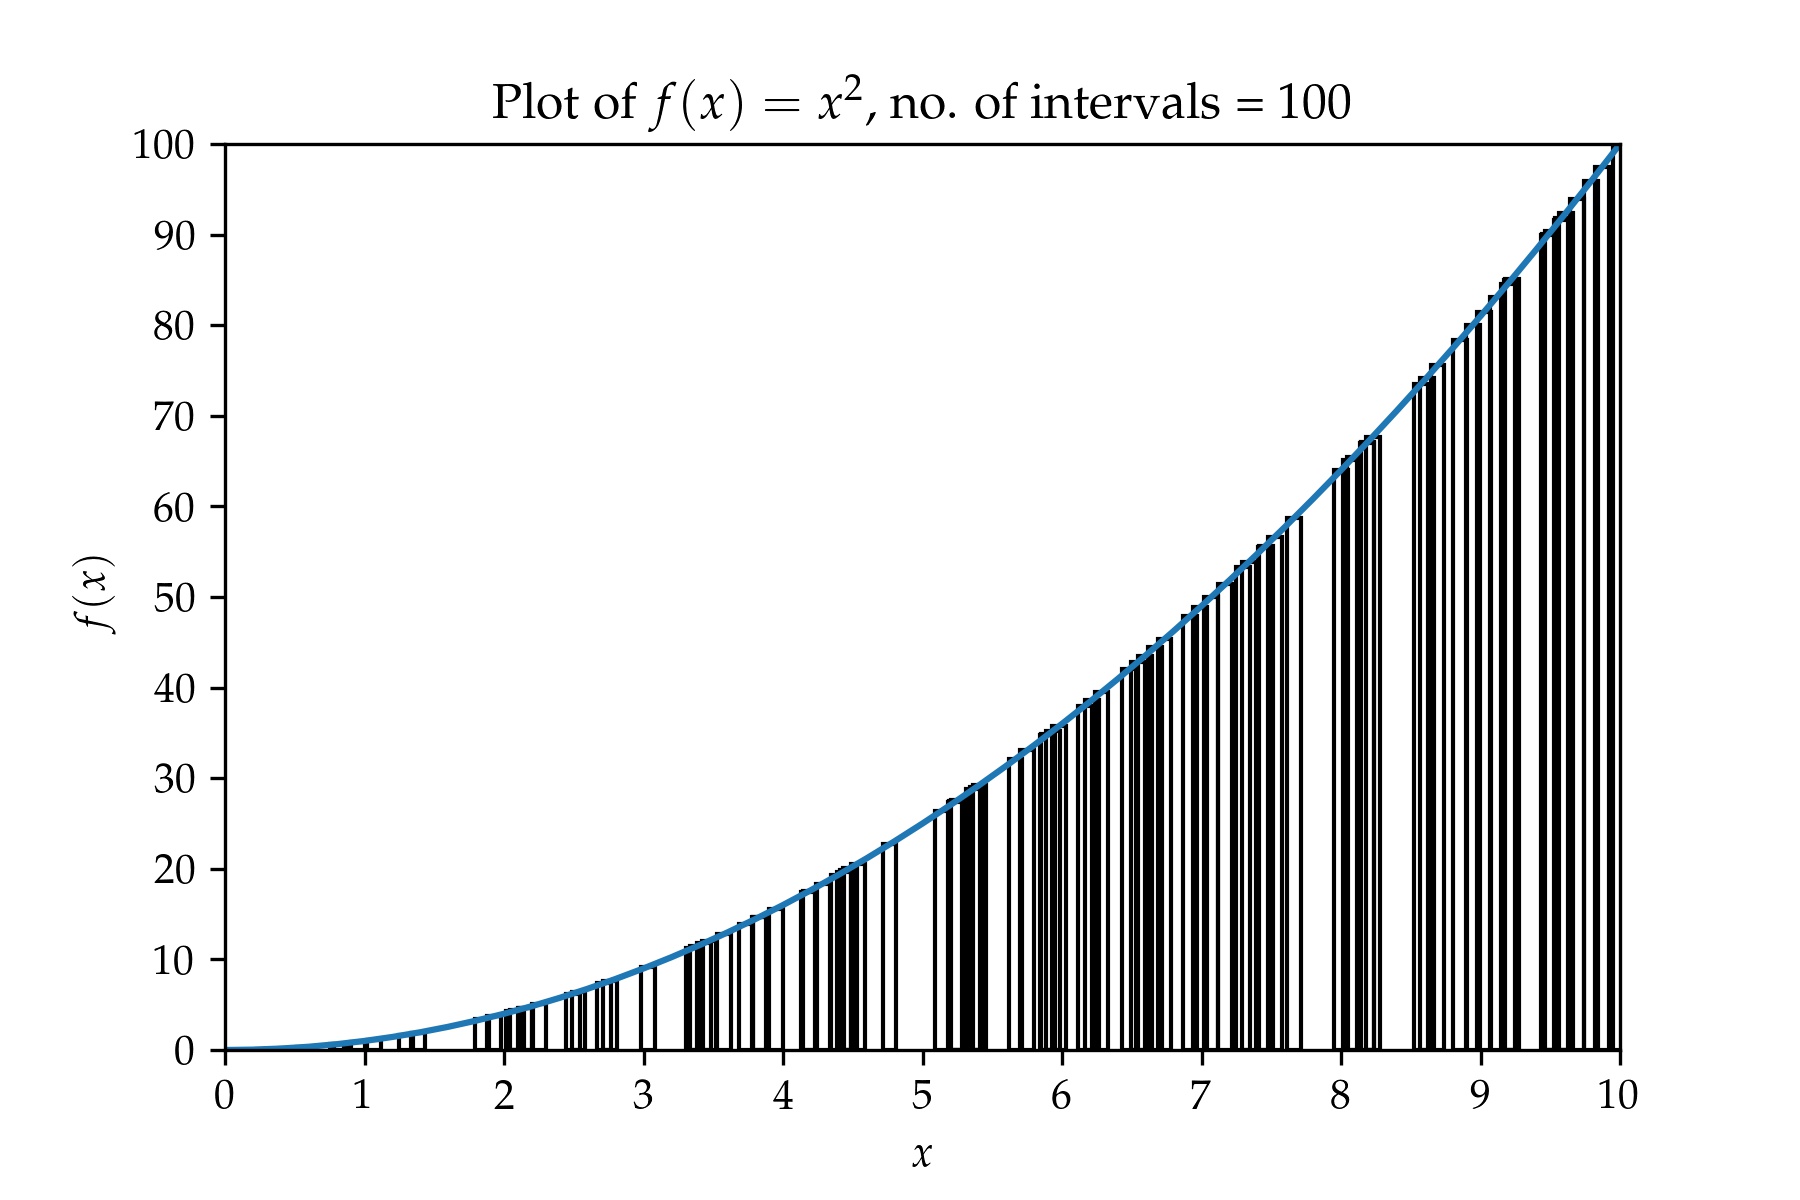 Plot of f(x) = x^2 with 100 samples